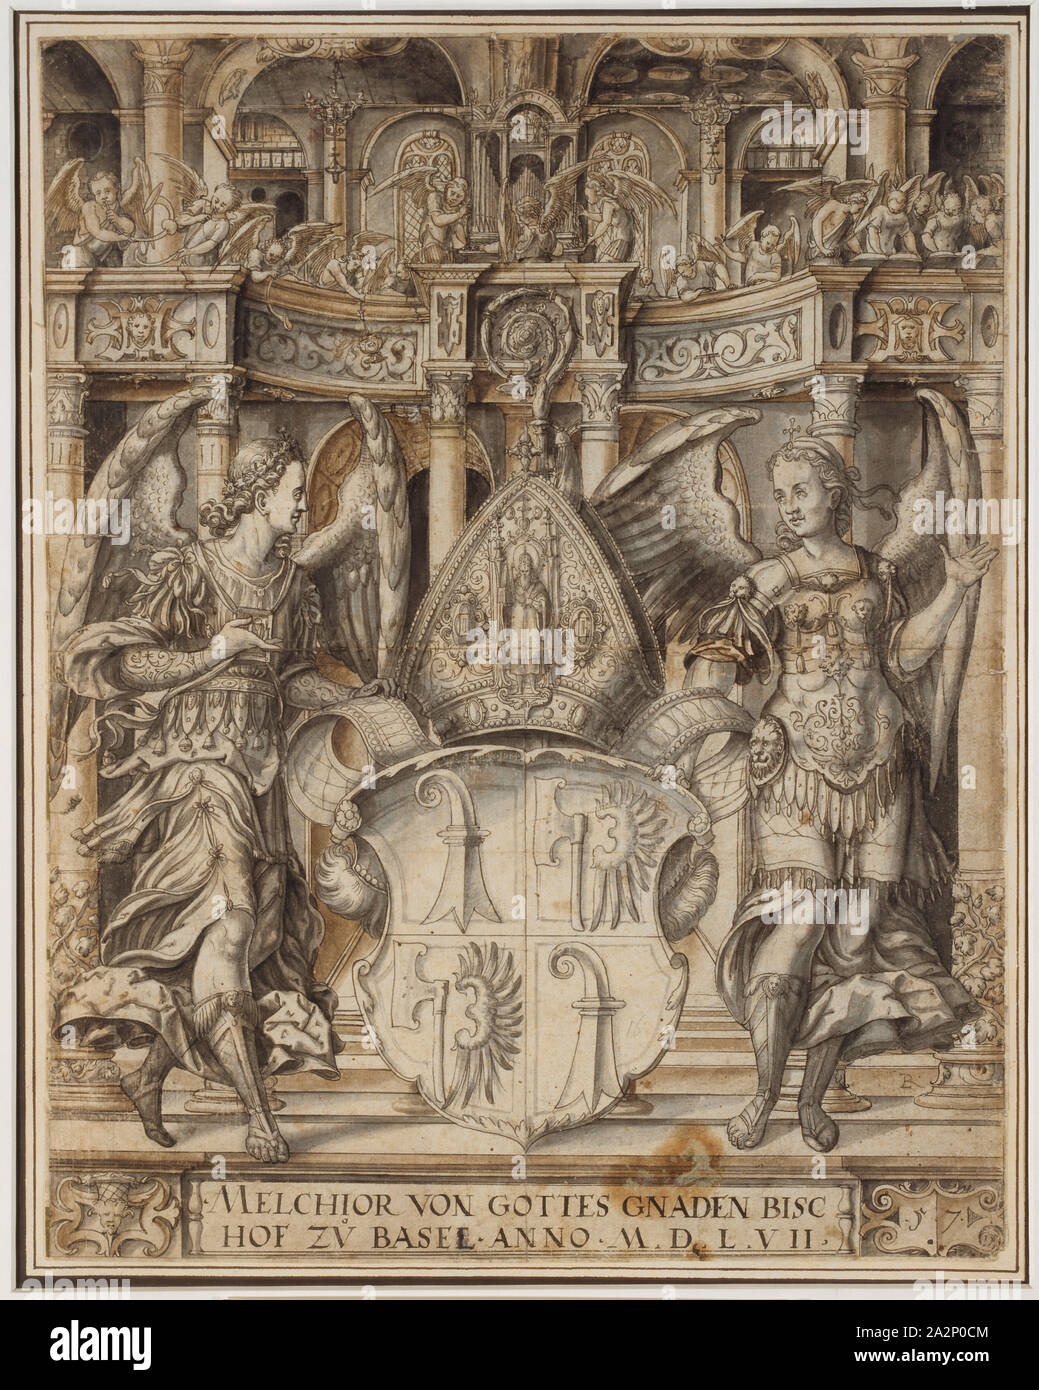 Disc rupture with two angels as shield attendants and the coat of arms of the Melchior von Lichtenfels, Prince-Bishop of Basel, above Angel Concerto, 1557, feather in gray-black, gray and brown washed, old mounted, sheet: 43.2 x 34 cm, U. inscribed and dated in the cartouche, : MELCHIOR OF GOD'S MERCY BISC, COURT ZV BASEL., ANNO., M.D.L.VII, u, ., r., monogrammed in the base: LR [lig.], underneath in cartouche: 57, Ludwig Ringler, Basel 1536–1606 Basel Stock Photo